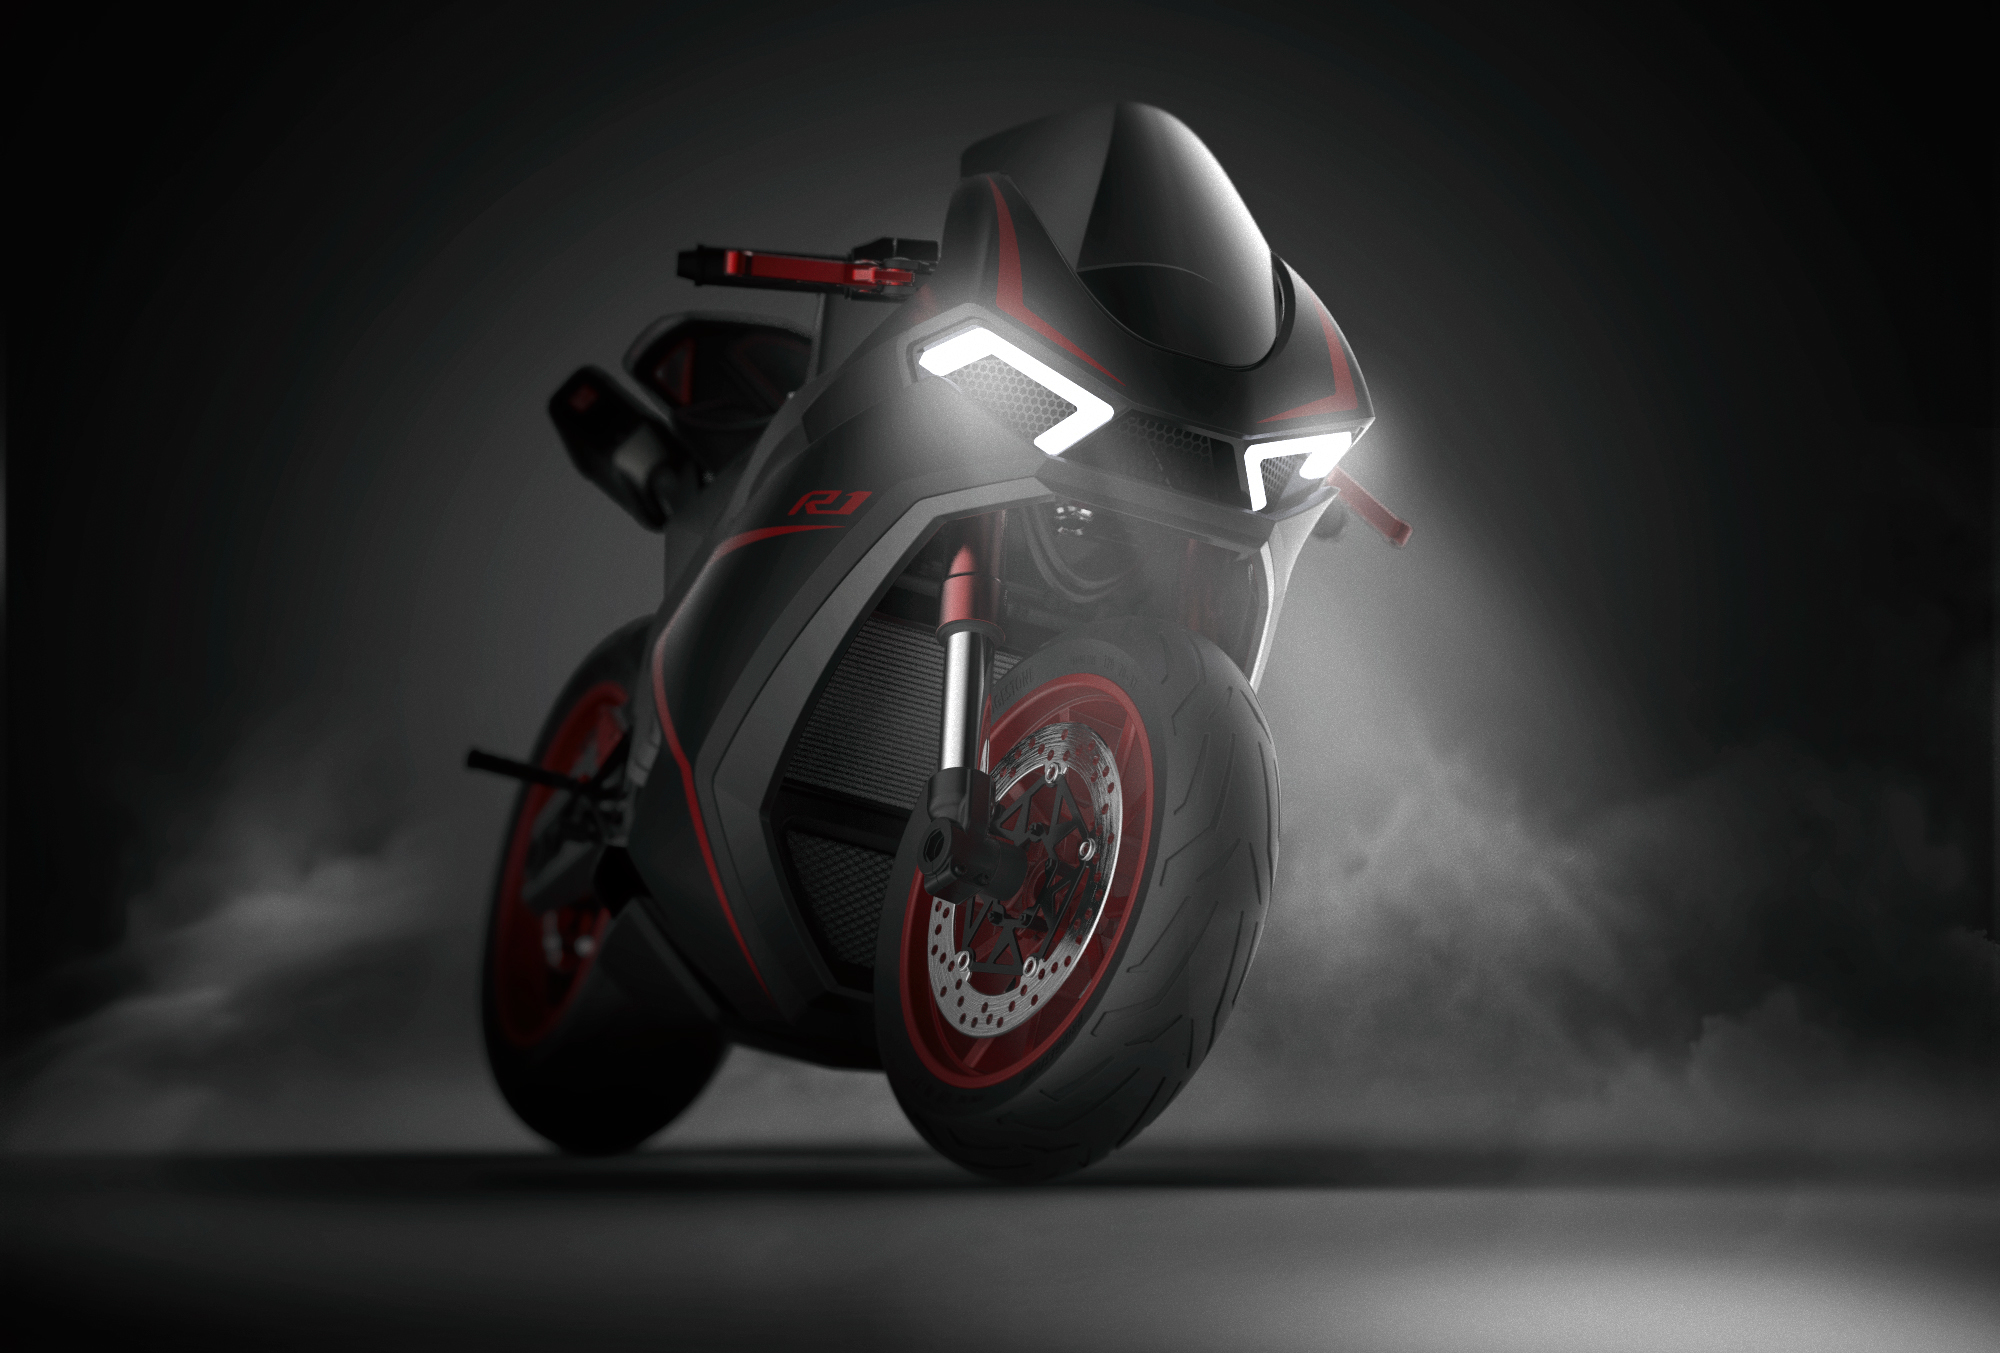 Yamaha R1 Concept, HD Bikes, 4k Wallpapers, Images, Backgrounds, Photos